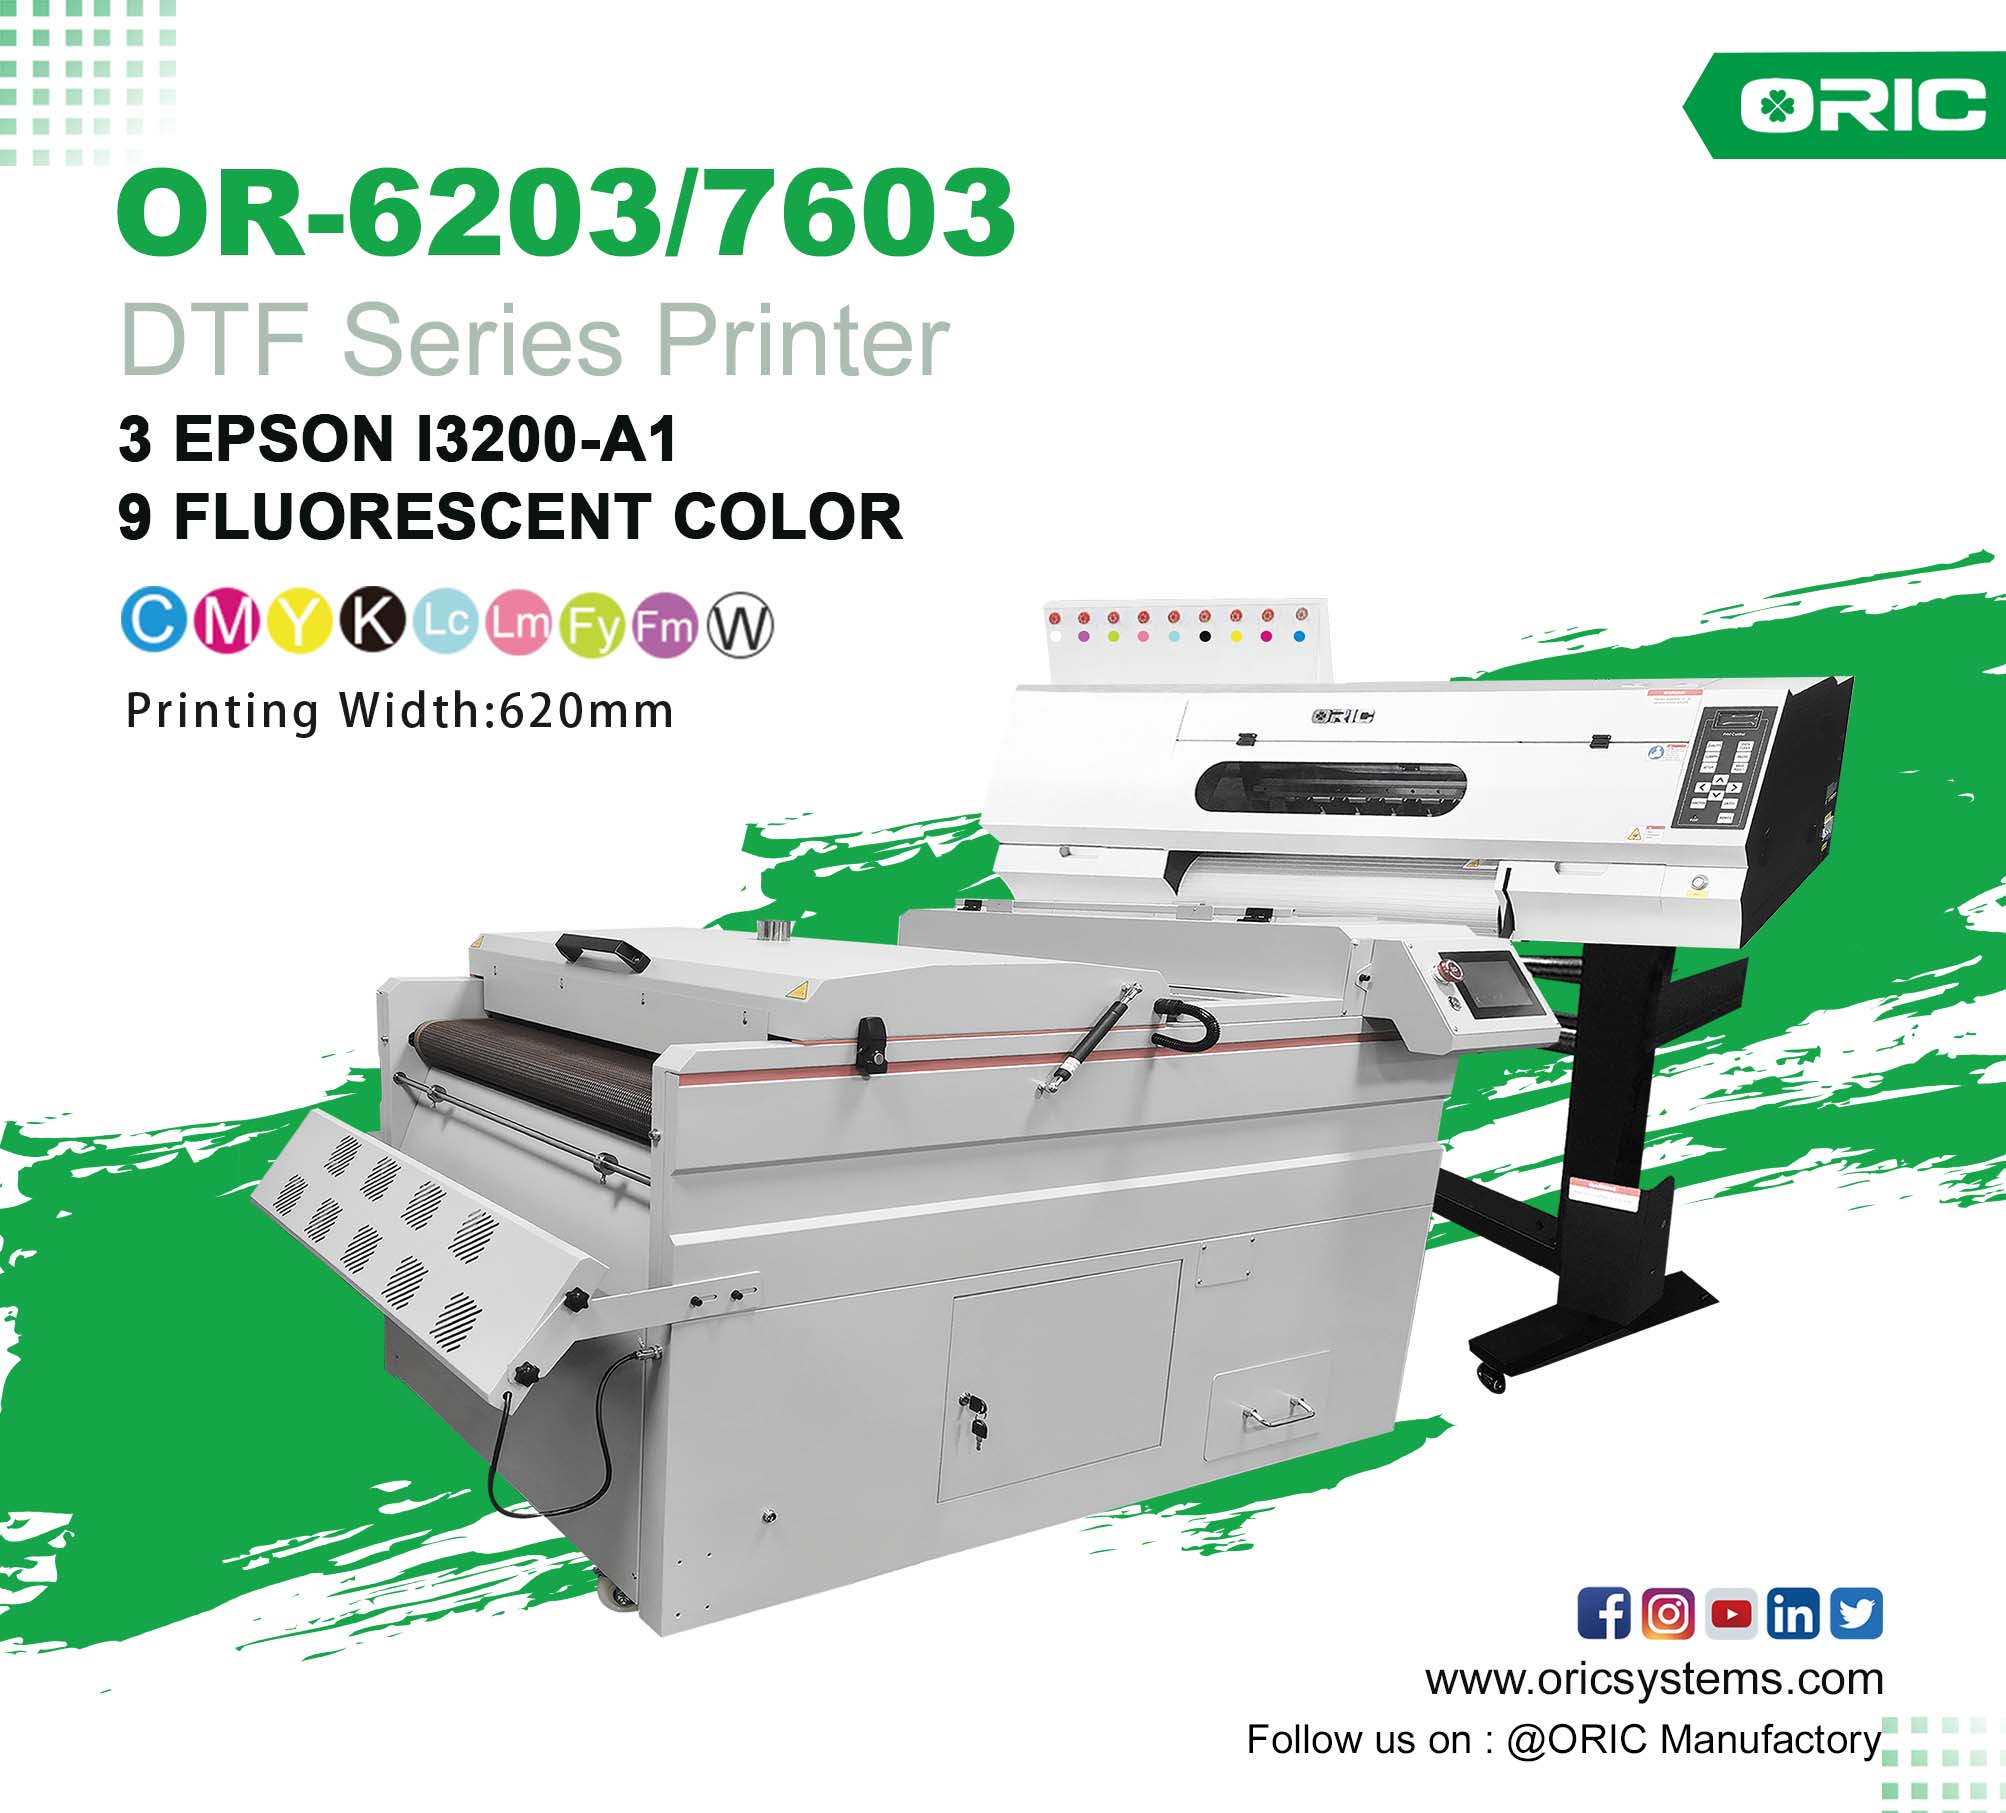 24” 9 COLORS GRADIENT PRINTING SOLUTION DTF OR-6203/7603 DTF